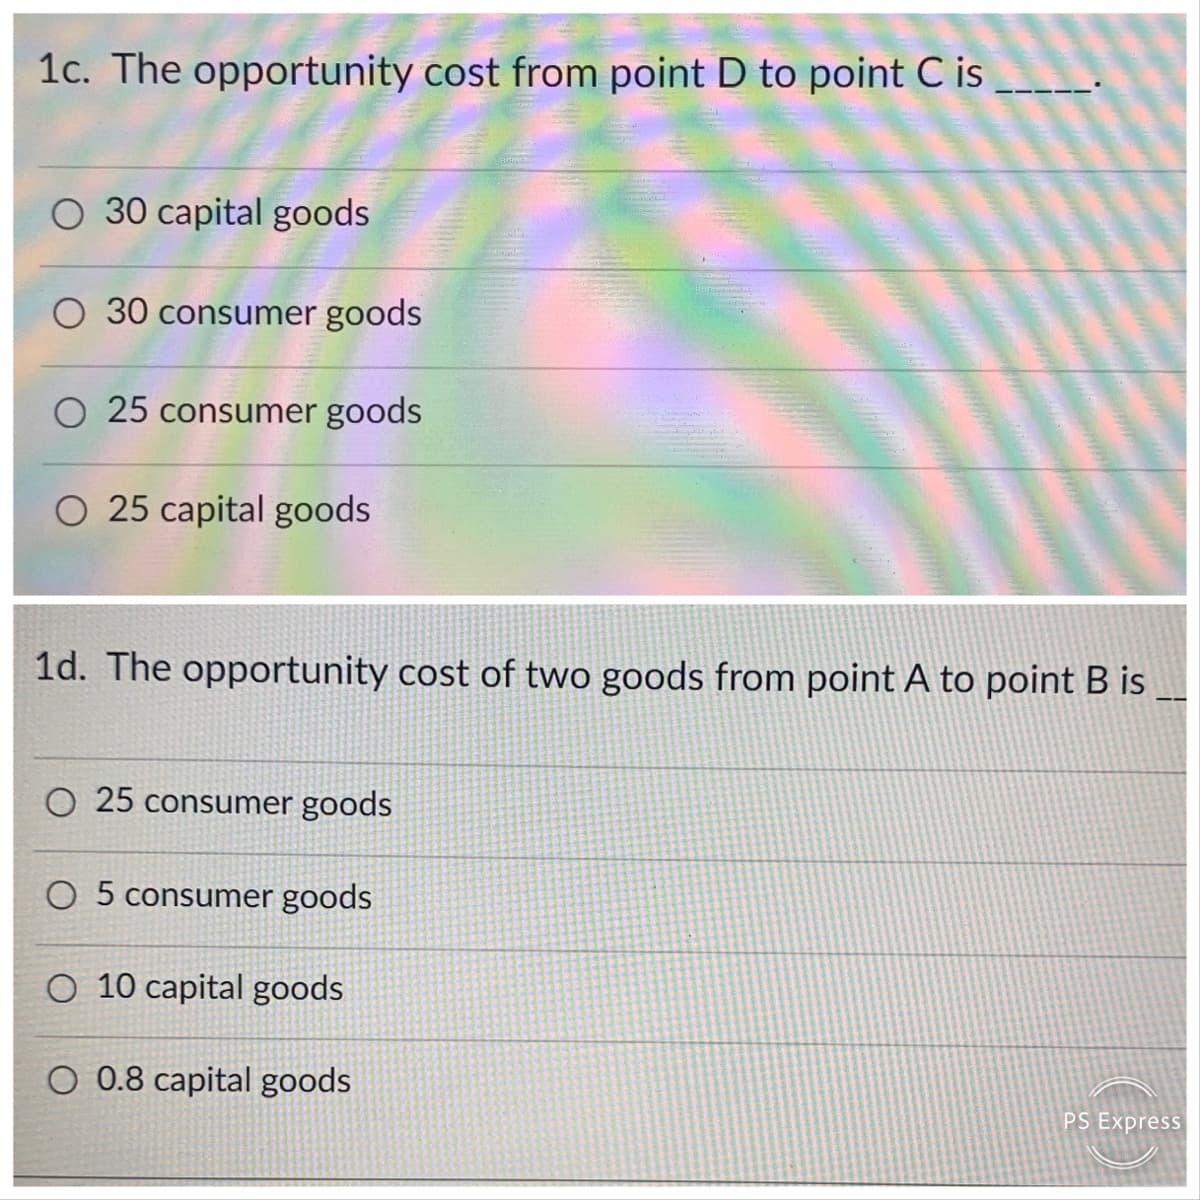 1c. The opportunity cost from point D to pointC is
O 30 capital goods
30 consumer goods
O 25 consumer goods
O 25 capital goods
1d. The opportunity cost of two goods from point A to point B is
O 25 consumer goods
O 5 consumer goods
O 10 capital goods
O 0.8 capital goods
PS Express
